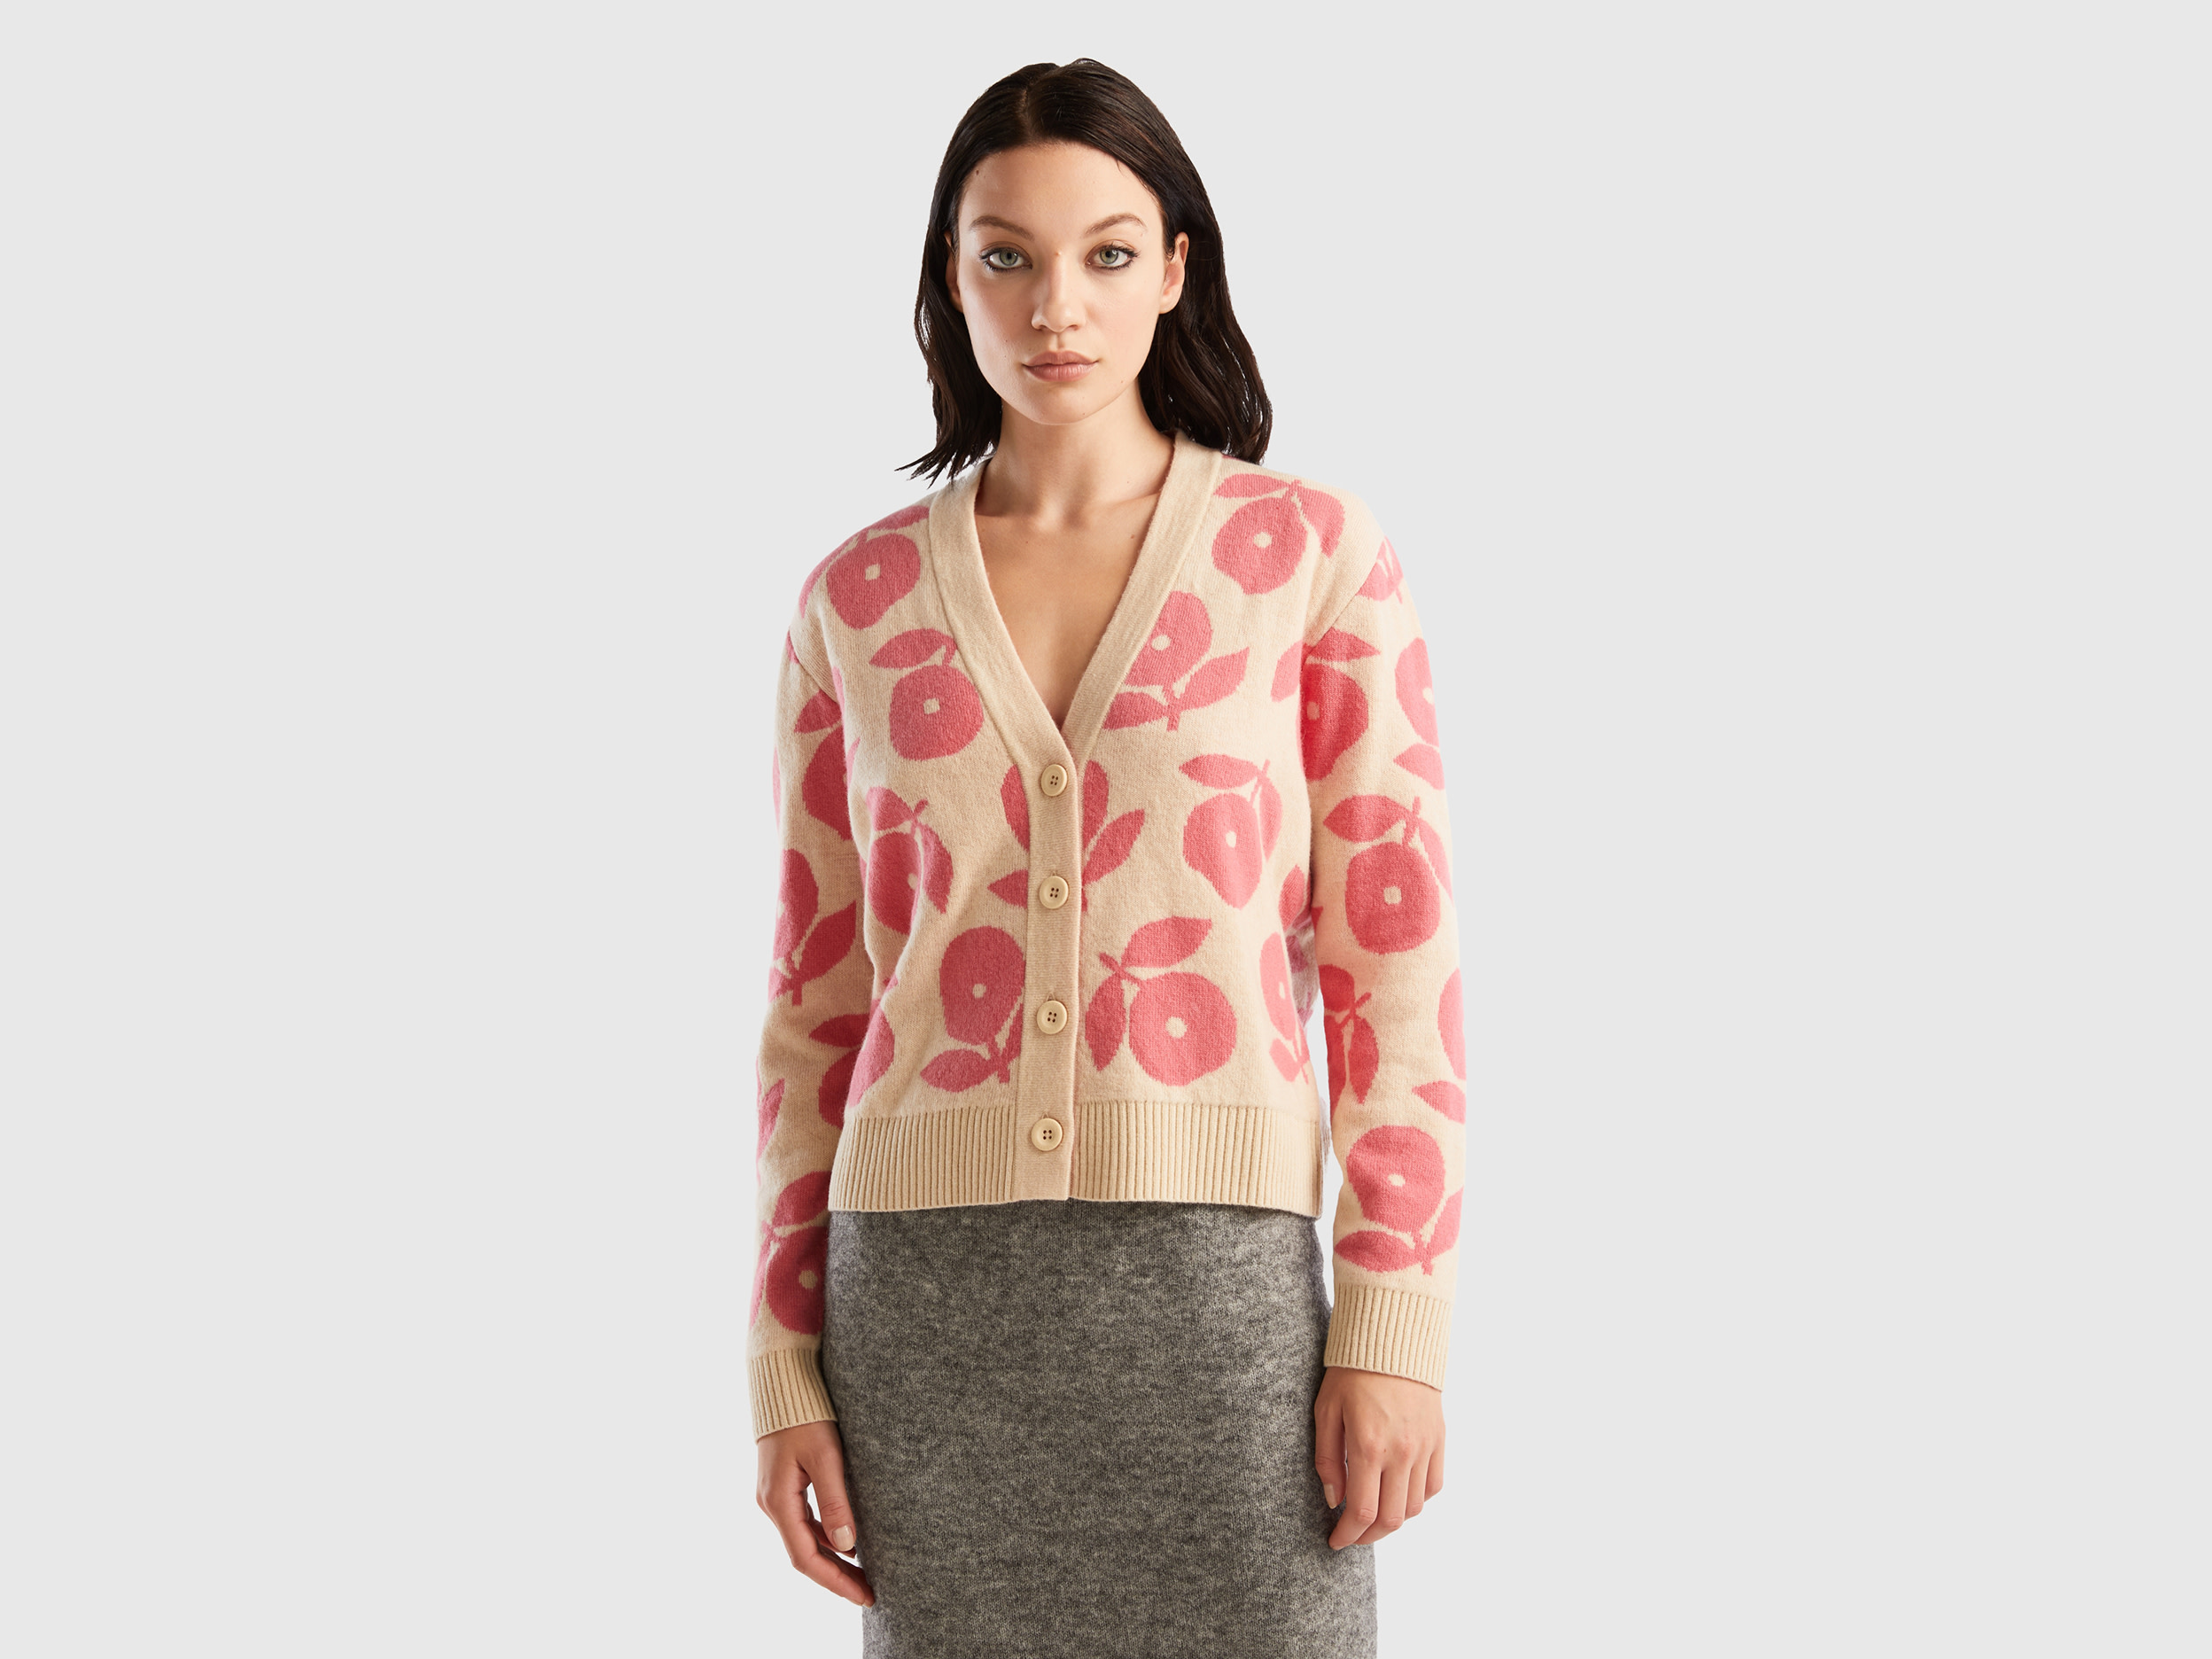 Benetton, Cardigan With Floral Inlays, size M, Beige, Women